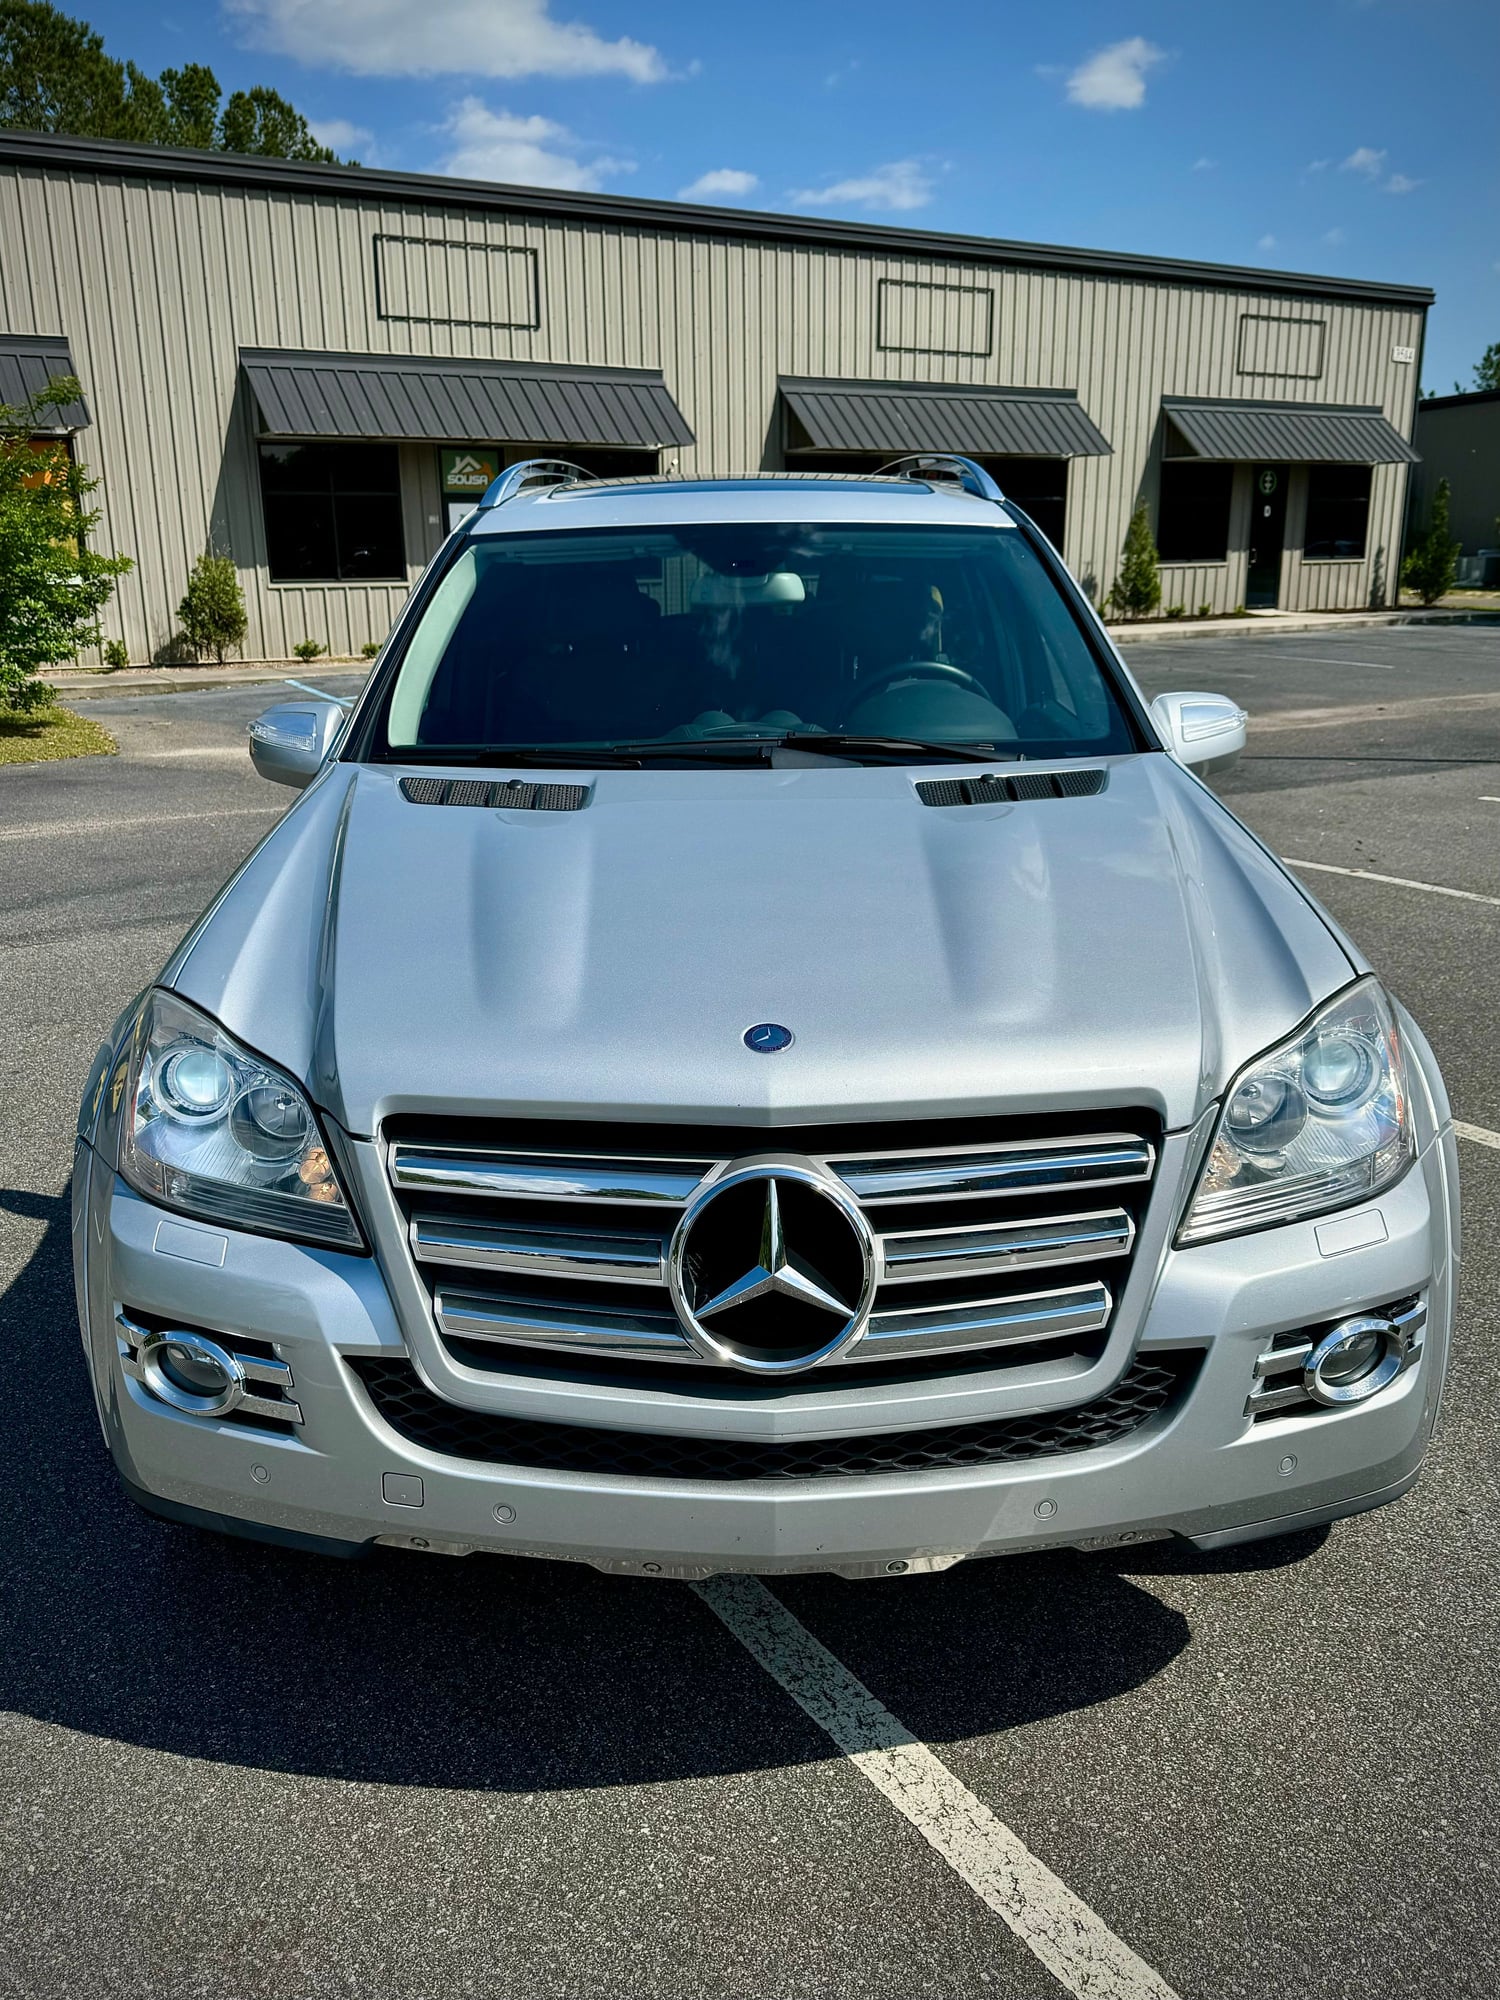 2009 Mercedes-Benz GL550 - 2009 GL550 w/ all service history since new - Used - VIN 4JGBF86E09A527063 - 97,000 Miles - 8 cyl - AWD - Automatic - SUV - Silver - Summerville, SC 29483, United States